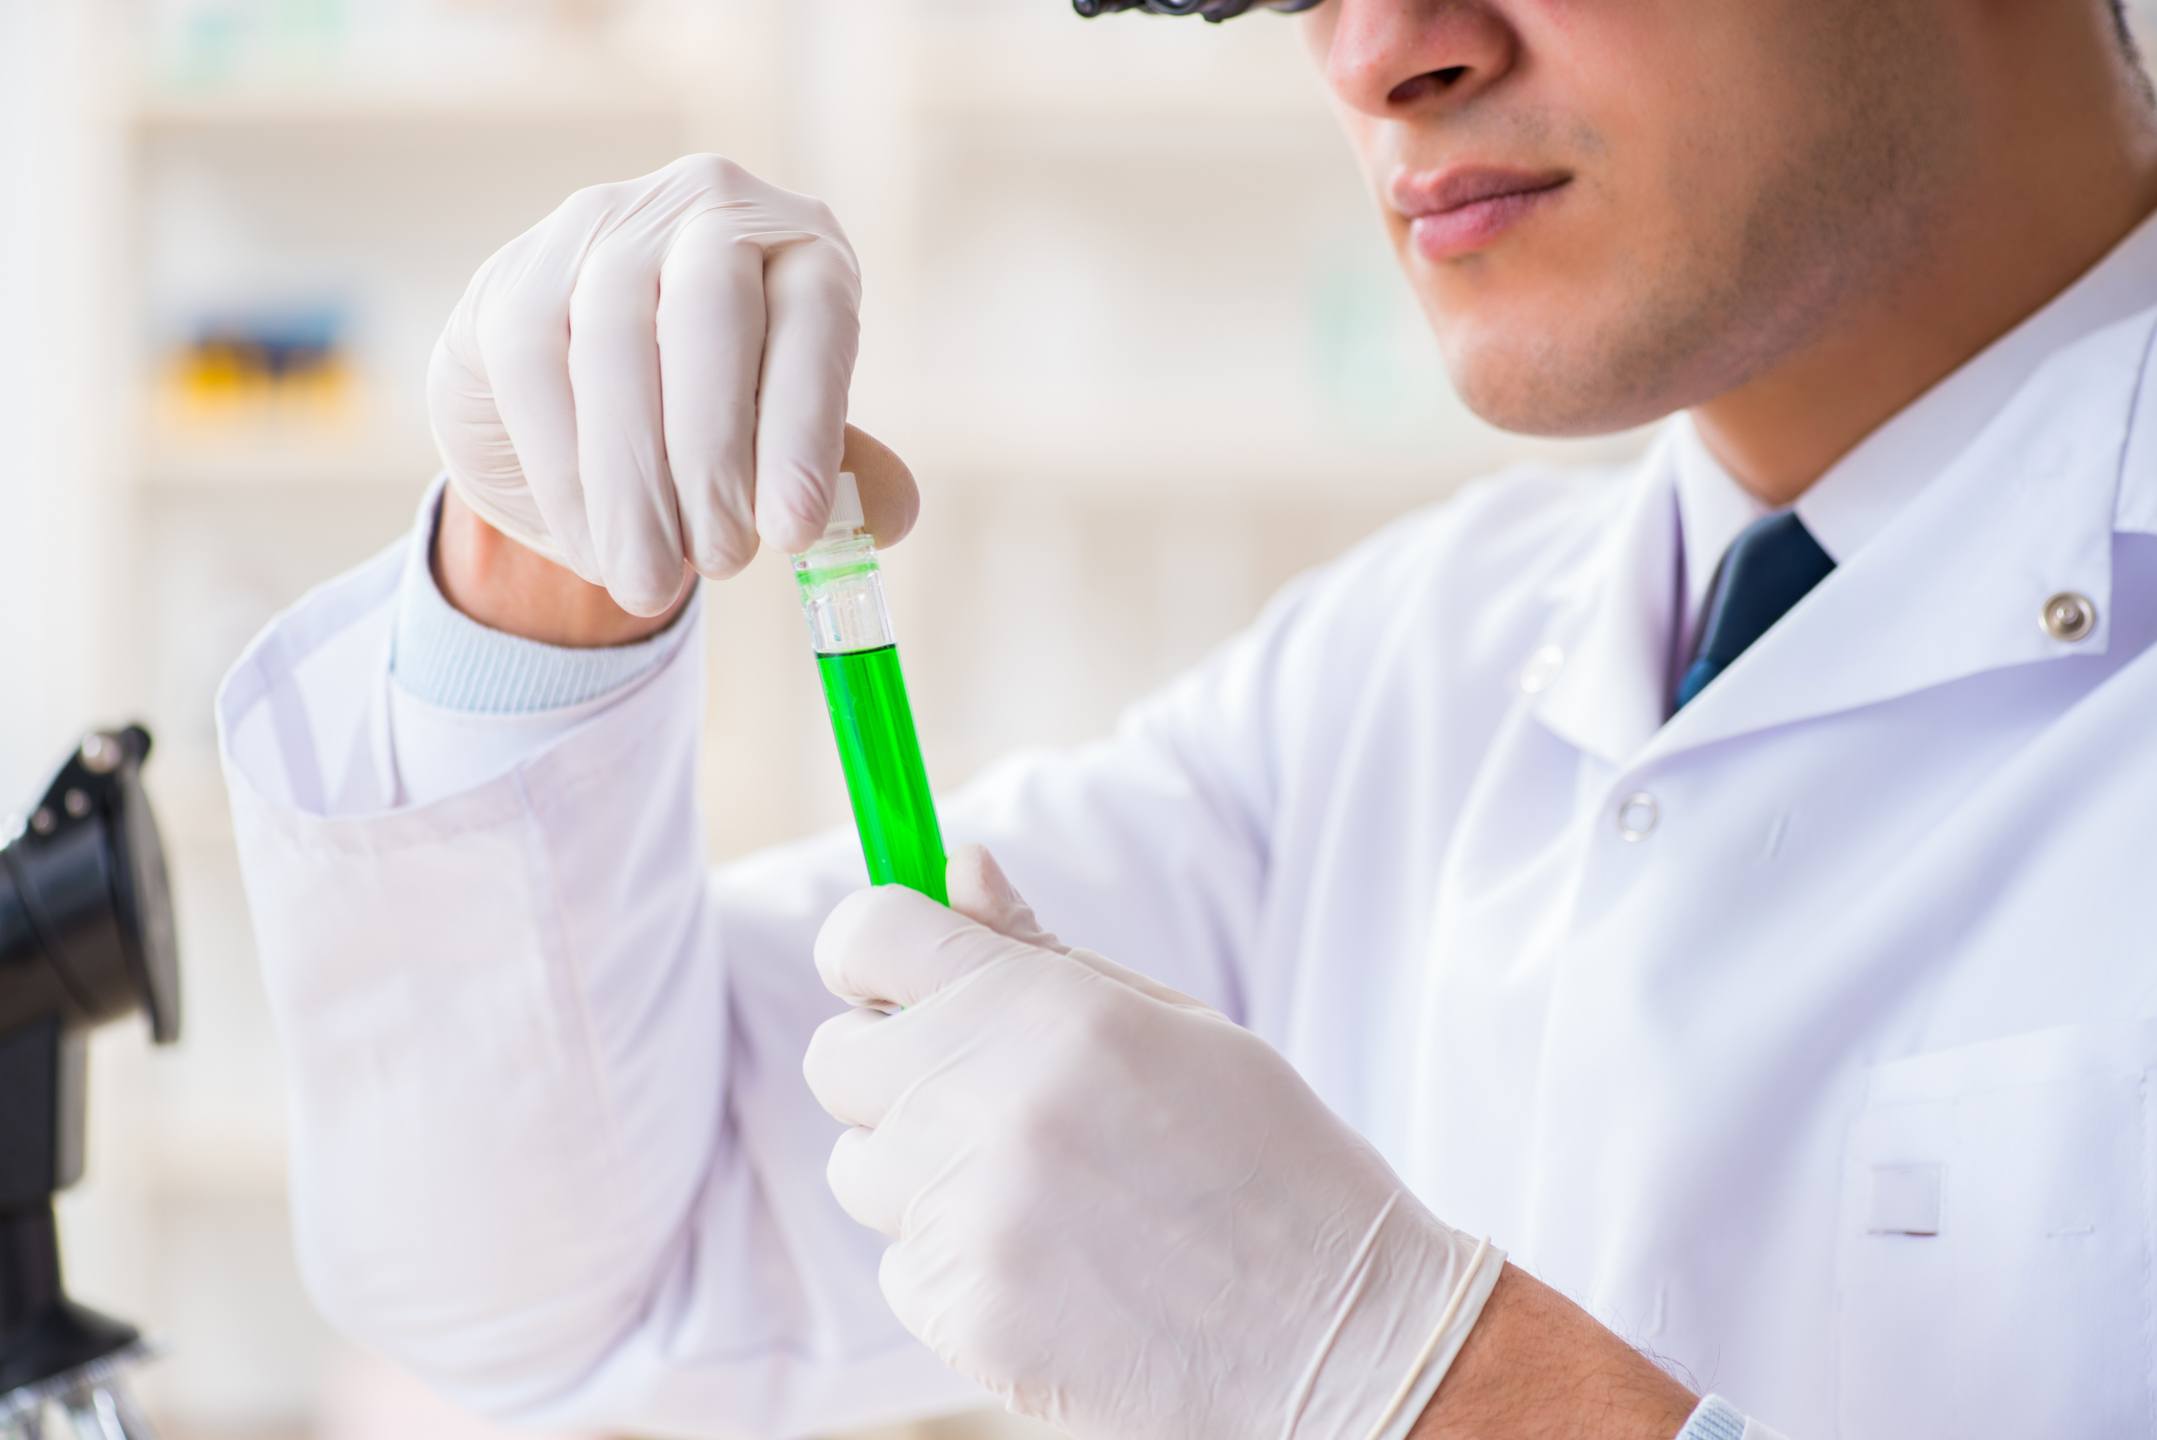 Hemp and cannabis testing labs are vital to building consumer trust, but results can vary dramatically from lab to lab. Photo: A scientist in gloves and a white lab coat examines a test tube of green liquid, with a microscope nearby.